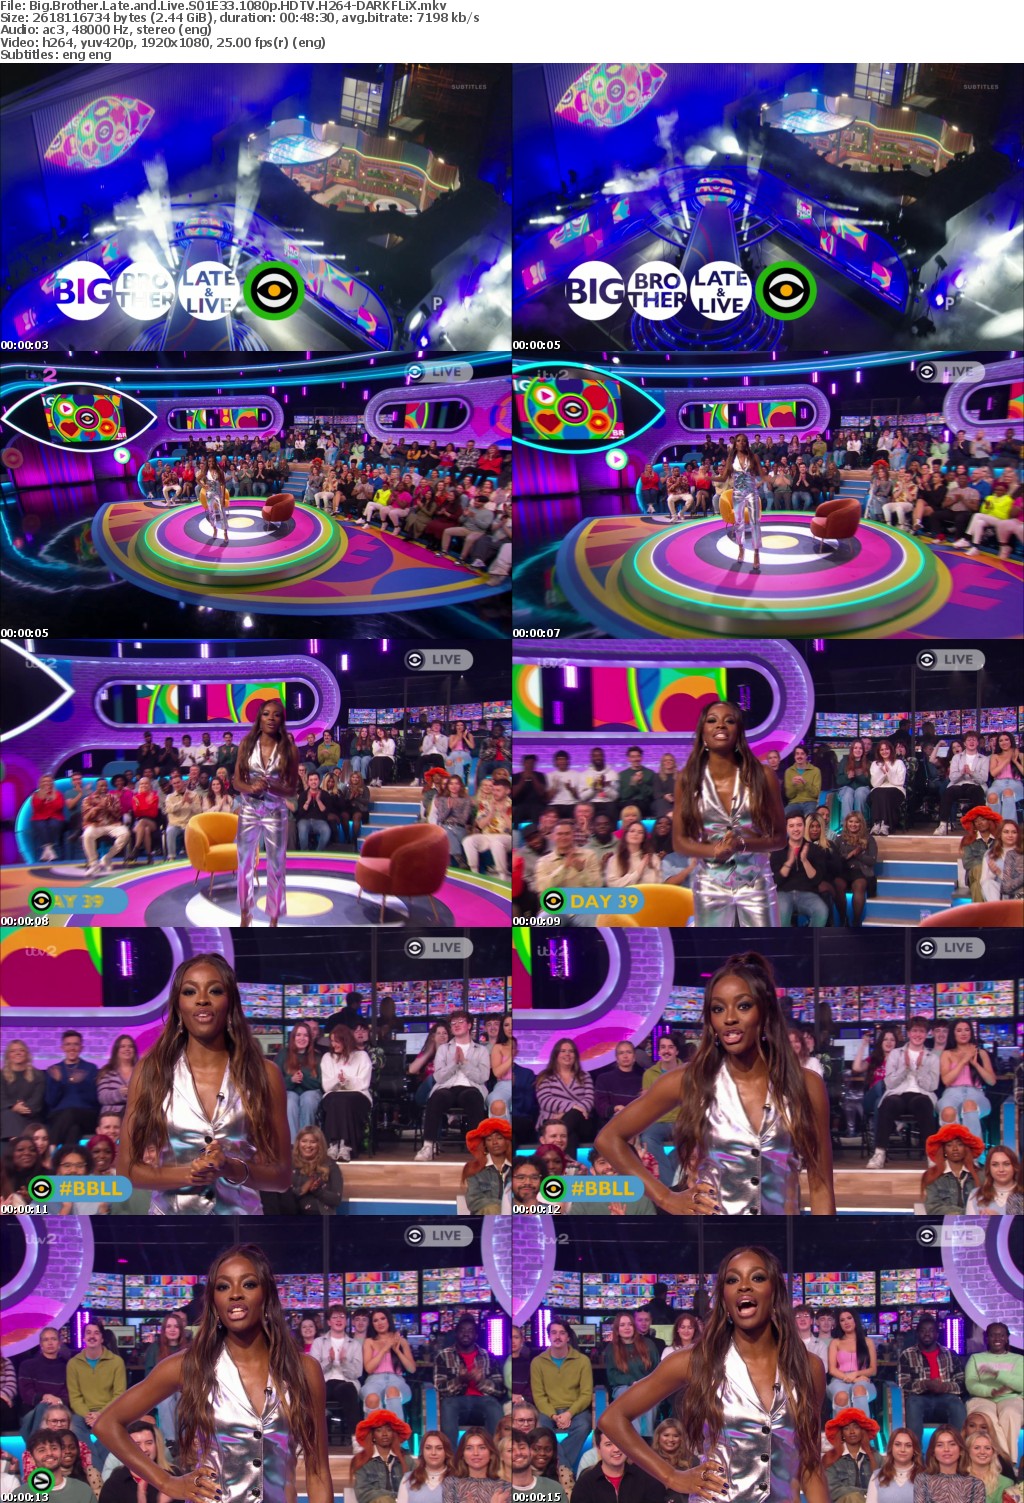 Big Brother Late and Live S01E33 1080p HDTV H264-DARKFLiX